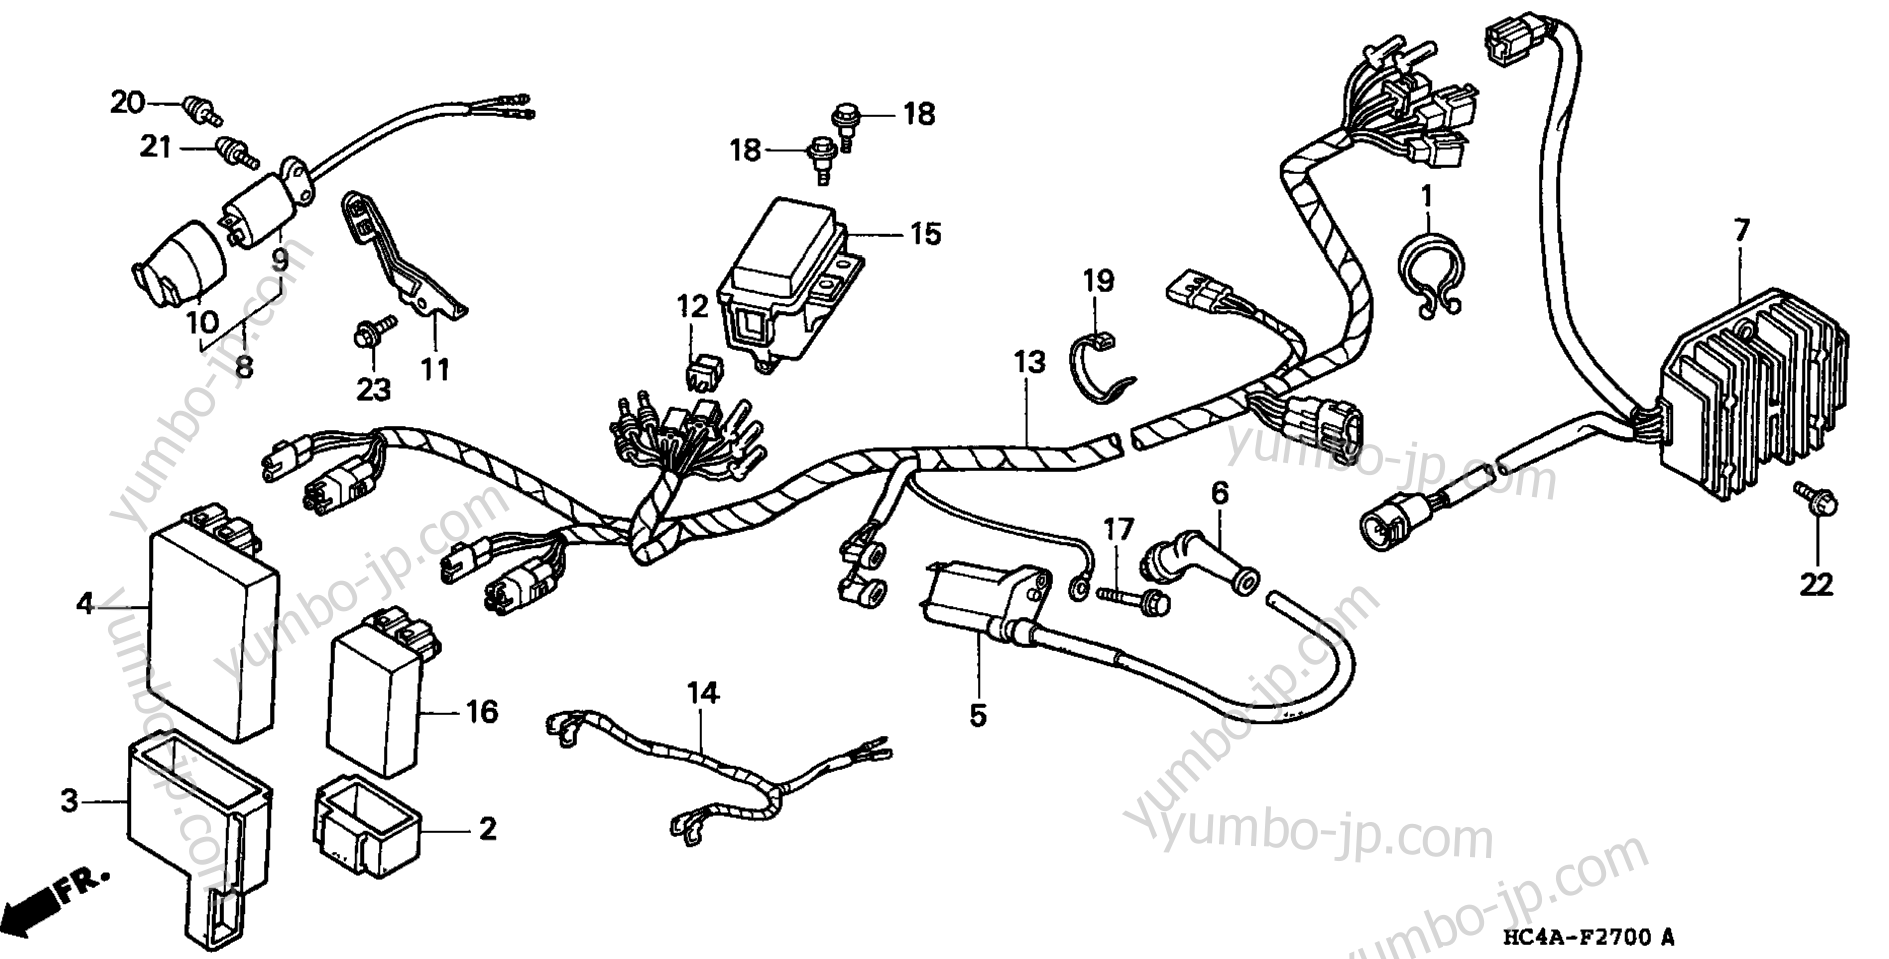 WIRE HARNESS for ATVs HONDA TRX300FW A 1993 year